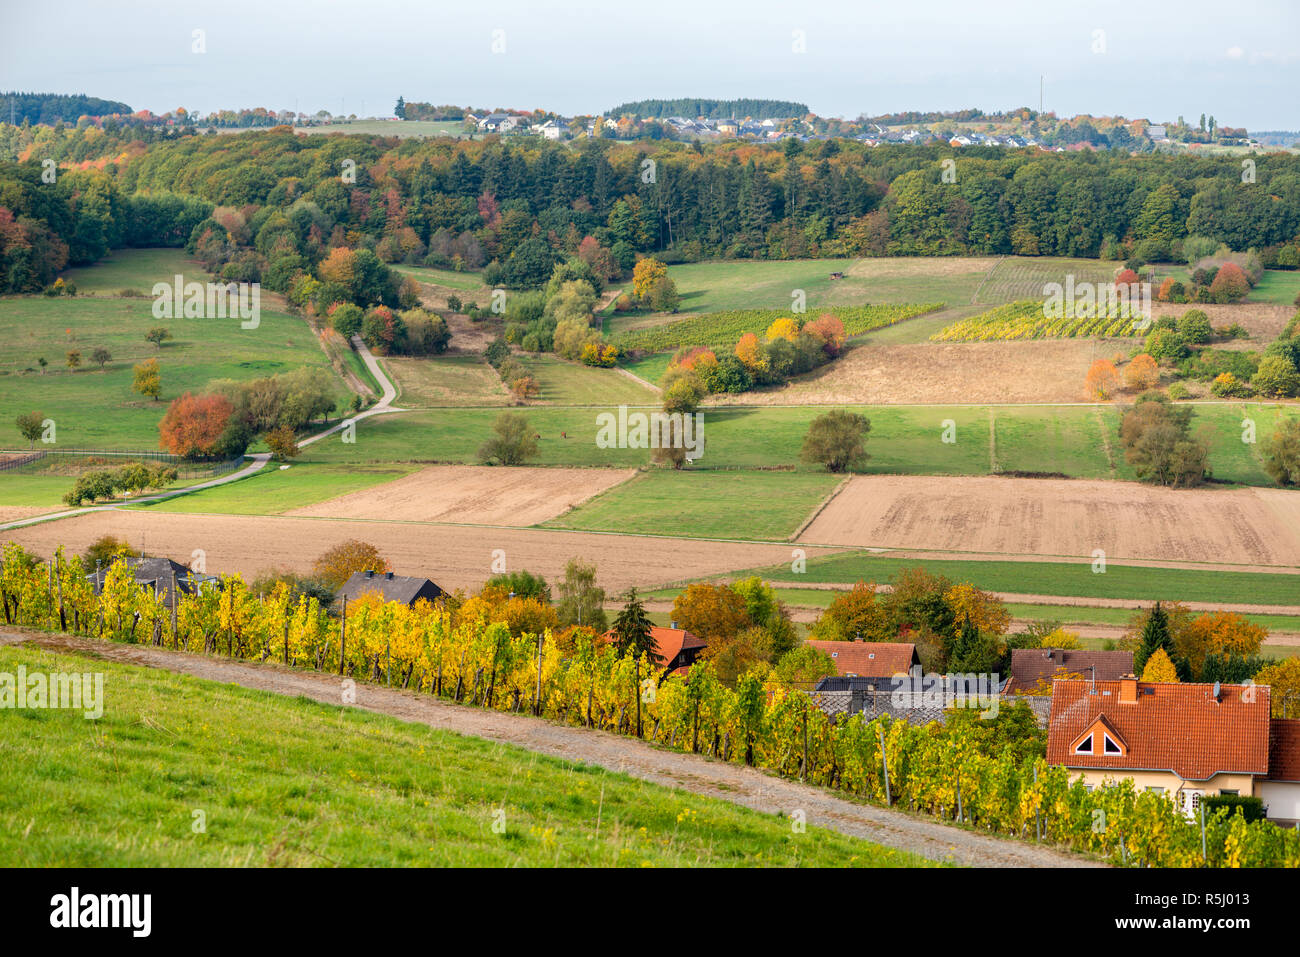 Landscape with vineyards along the Moselle River and valley near the town of Konz, Rhineland-Palatinate, Germany, Europe Stock Photo